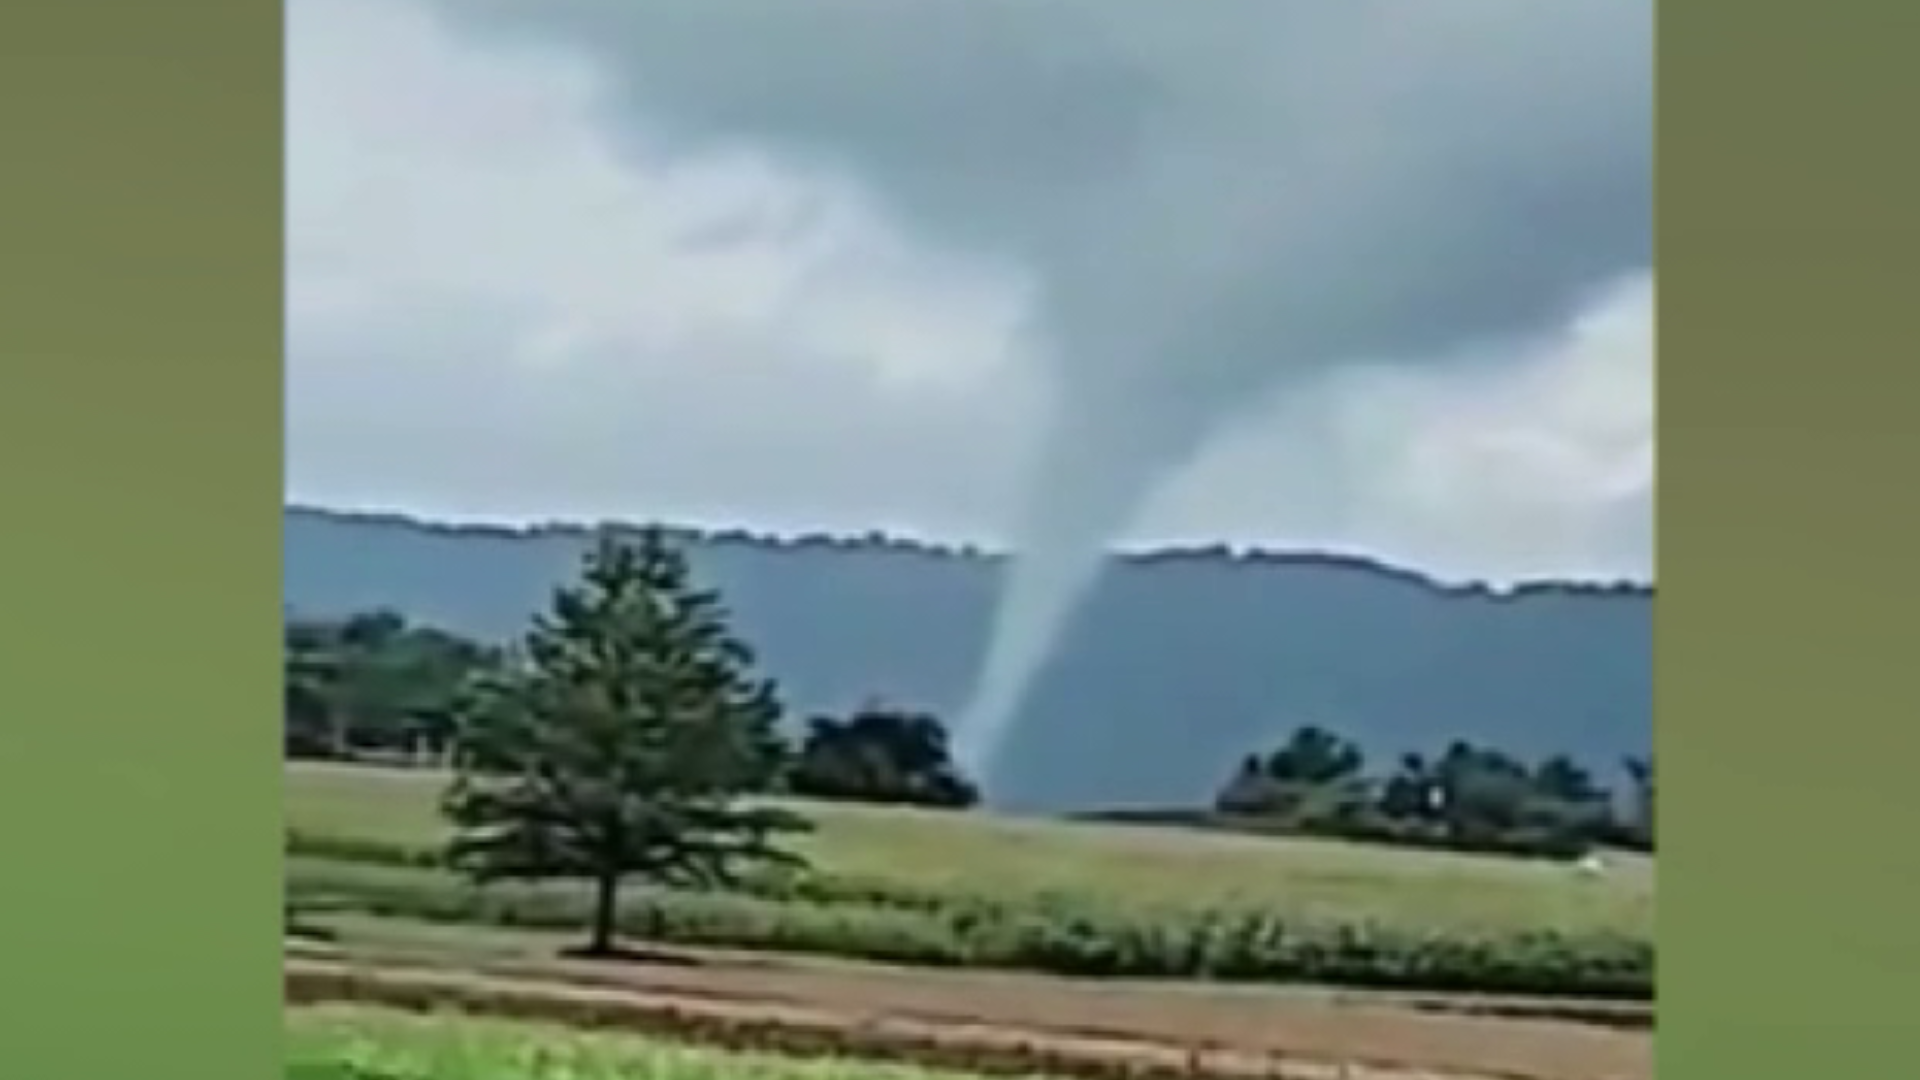 The National Weather Service in State College confirms a tornado touched down Wednesday in southern Schuylkill County.